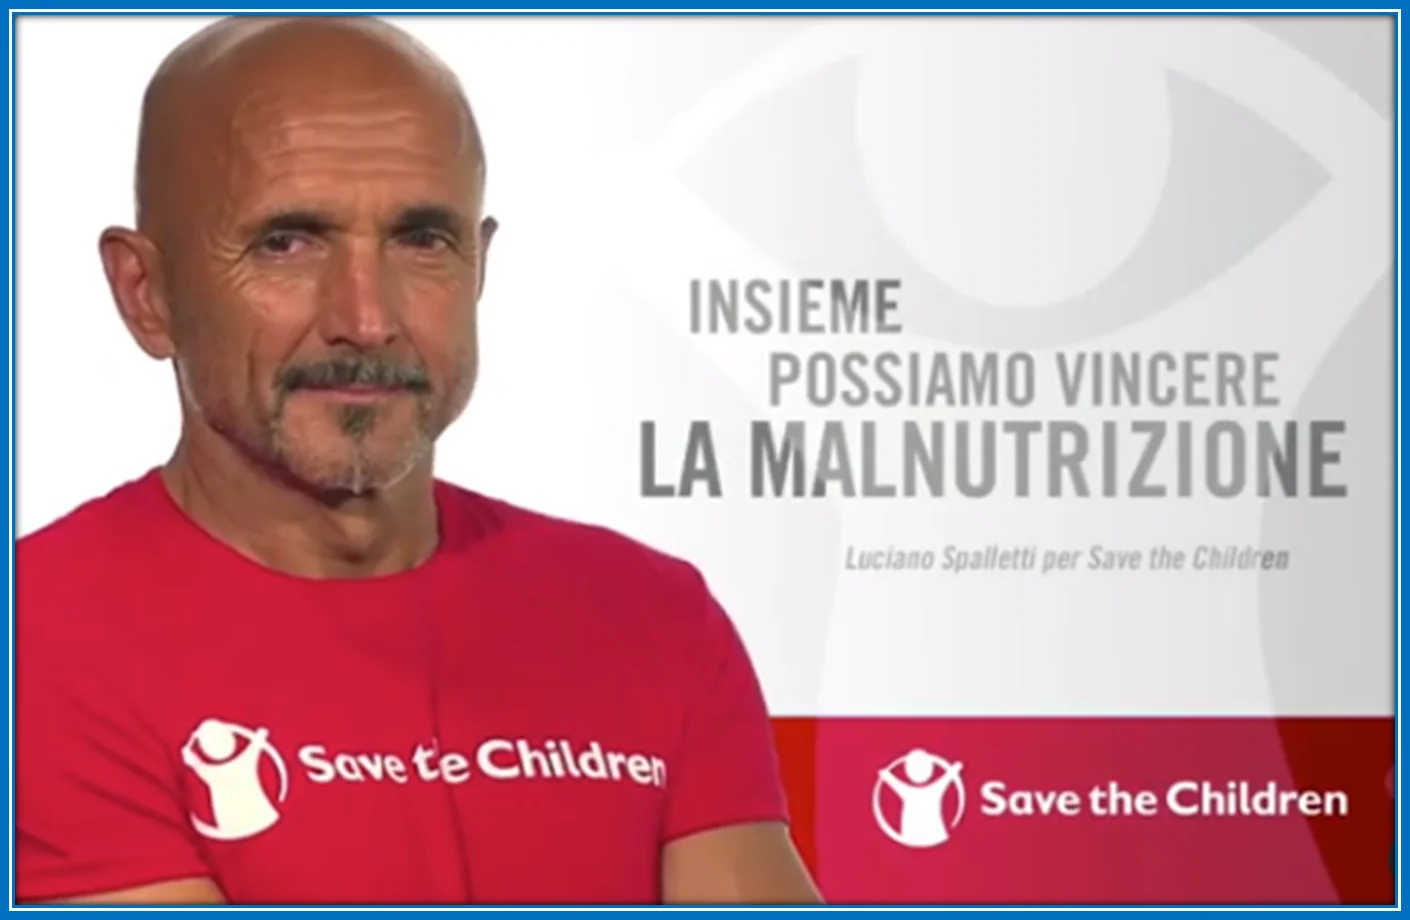 Luciano Spalletti expresses his longstanding commitment to Save the Children, emphasizing a sense of duty to make a tangible impact on those in need, particularly children. Image Credit: Instagram.com/lucianospalletti/